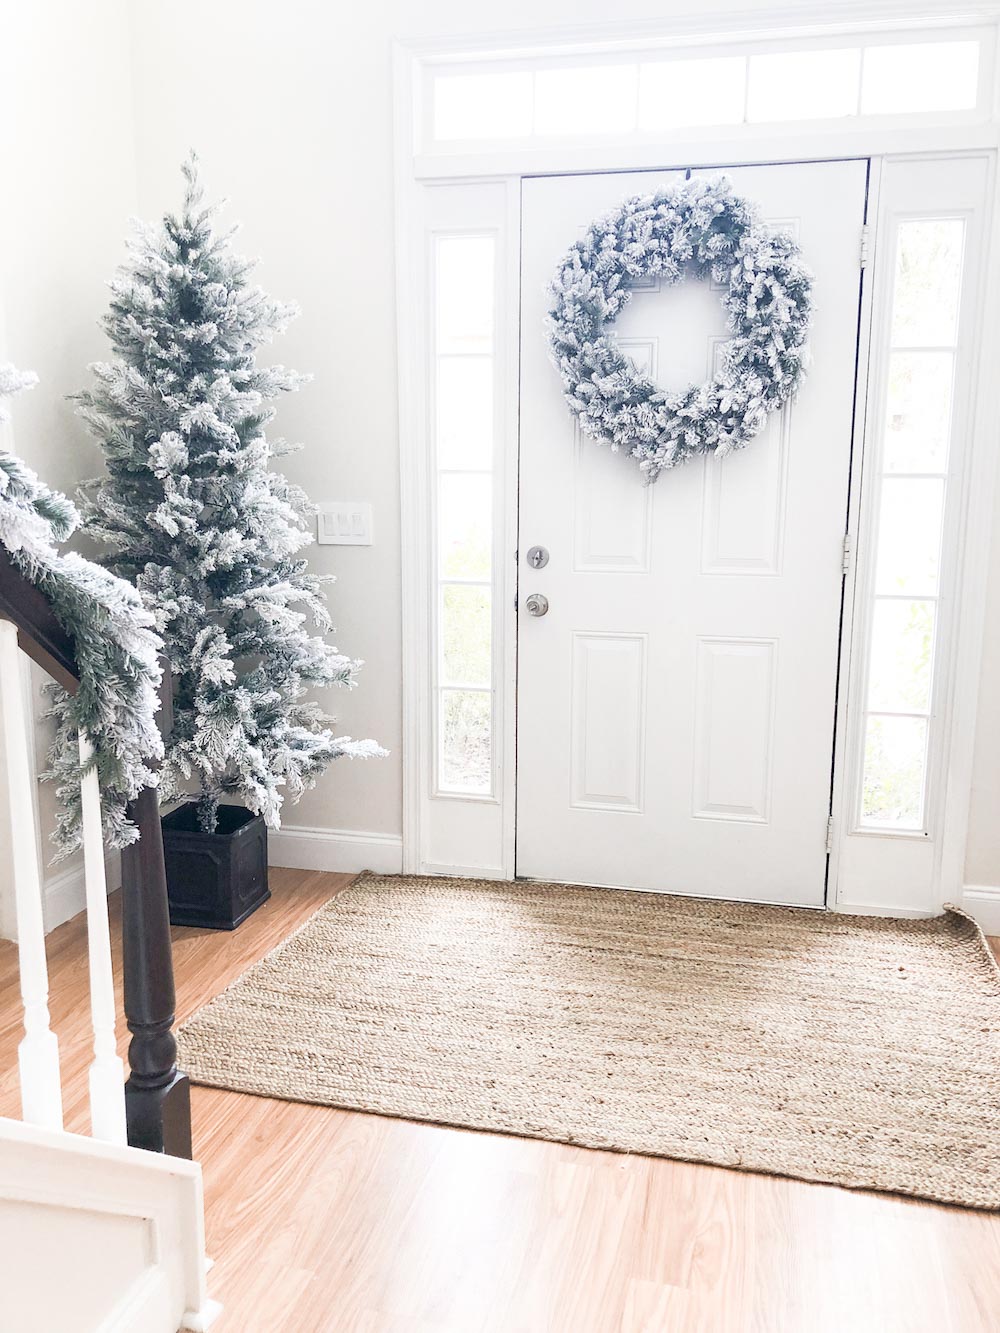 Natural area rug on floor with decorated holiday wreath on back door.